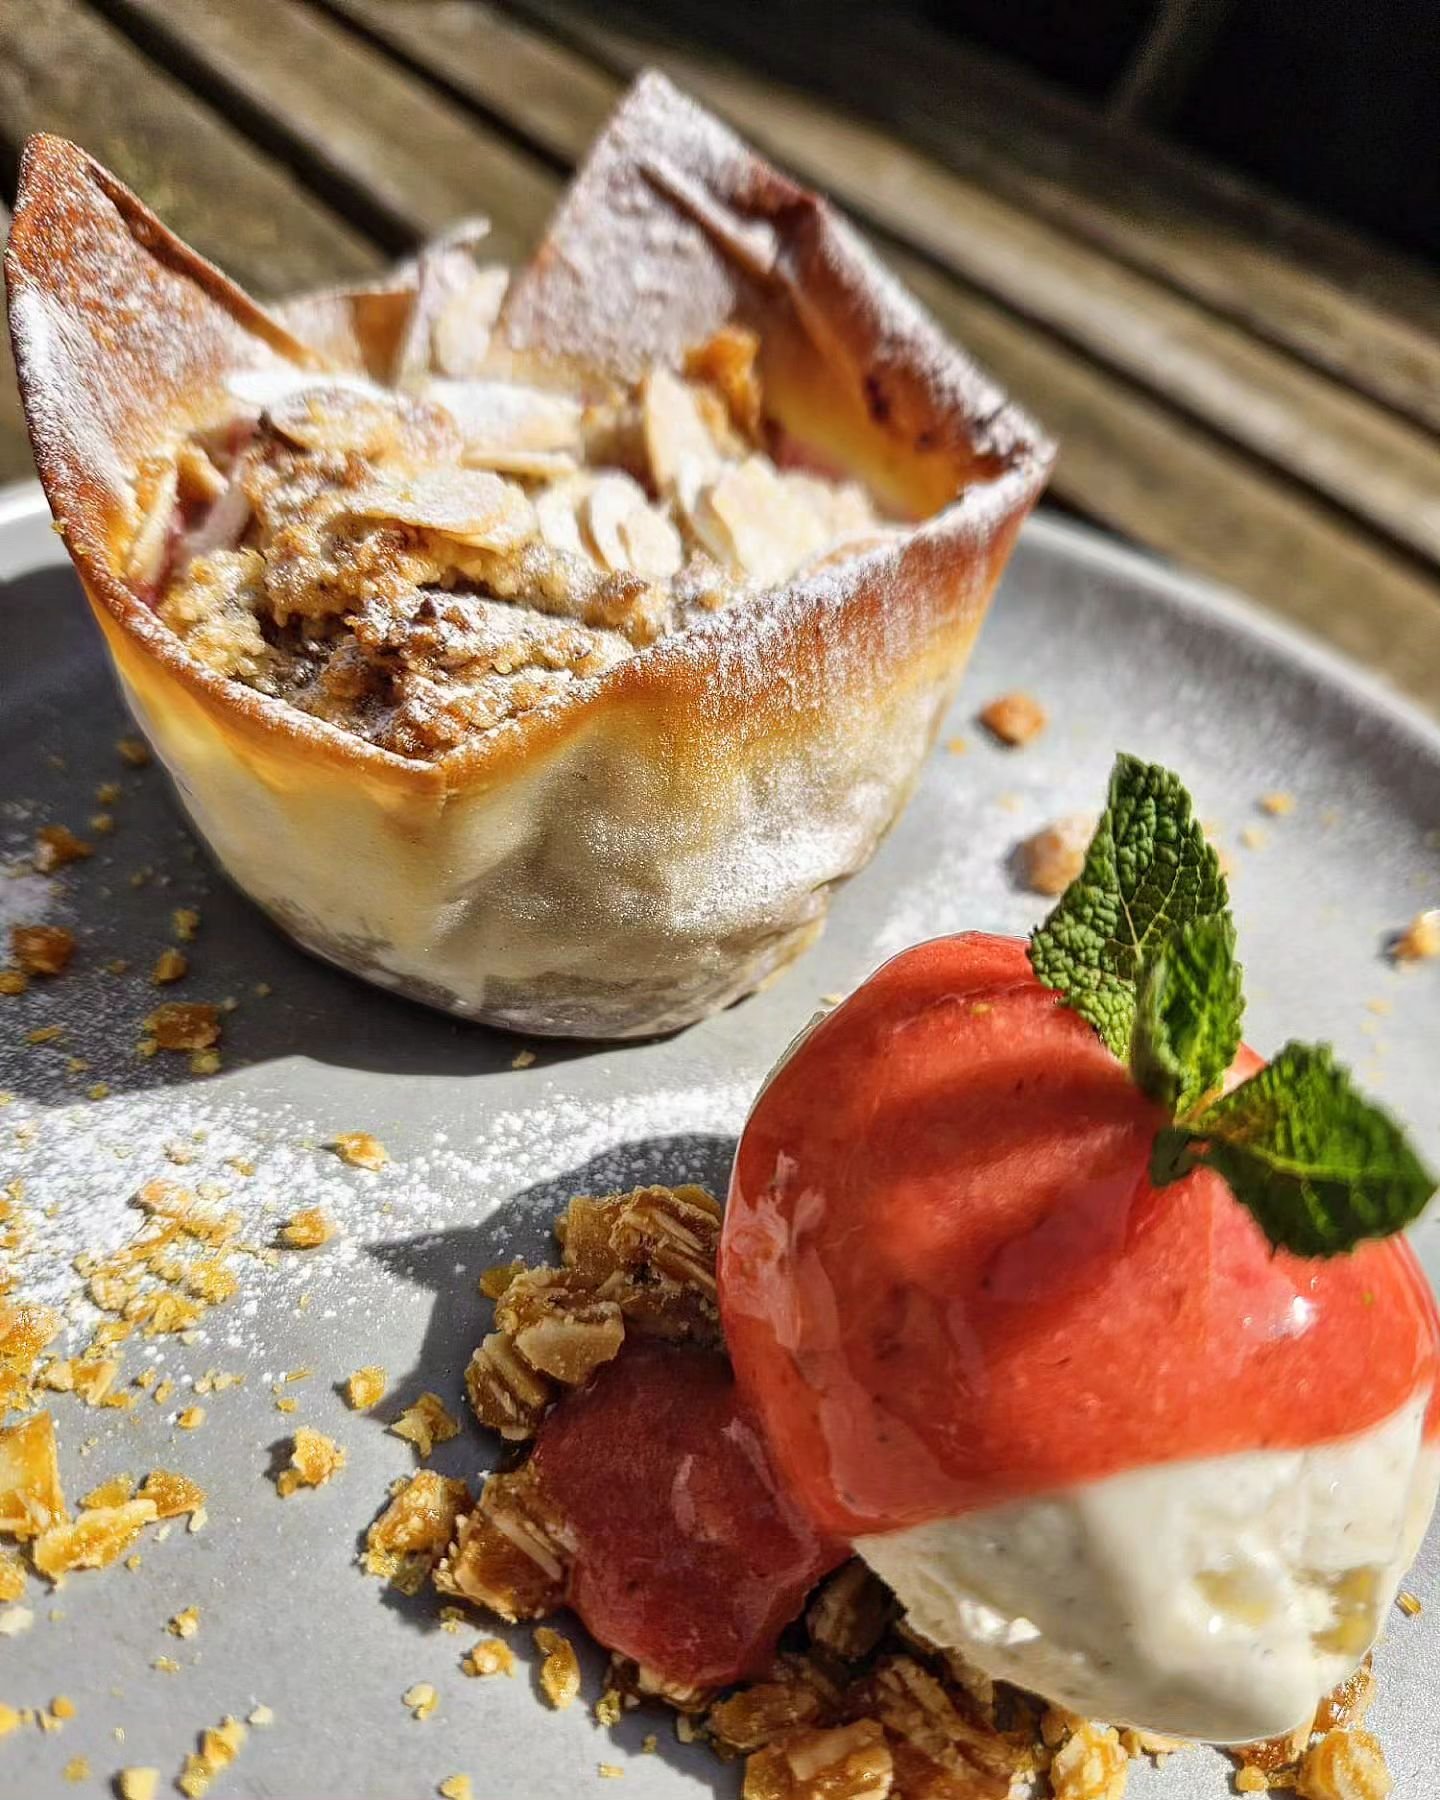 Tomorrow night's dessert is an absolute early summer dream... British raspberry Bakewell tart with salted almond brittle, raspberry and strawberry coulis and creamy vanilla ice-cream 💕💕💕

Dare we say that it could even be the first Al fresco bistr